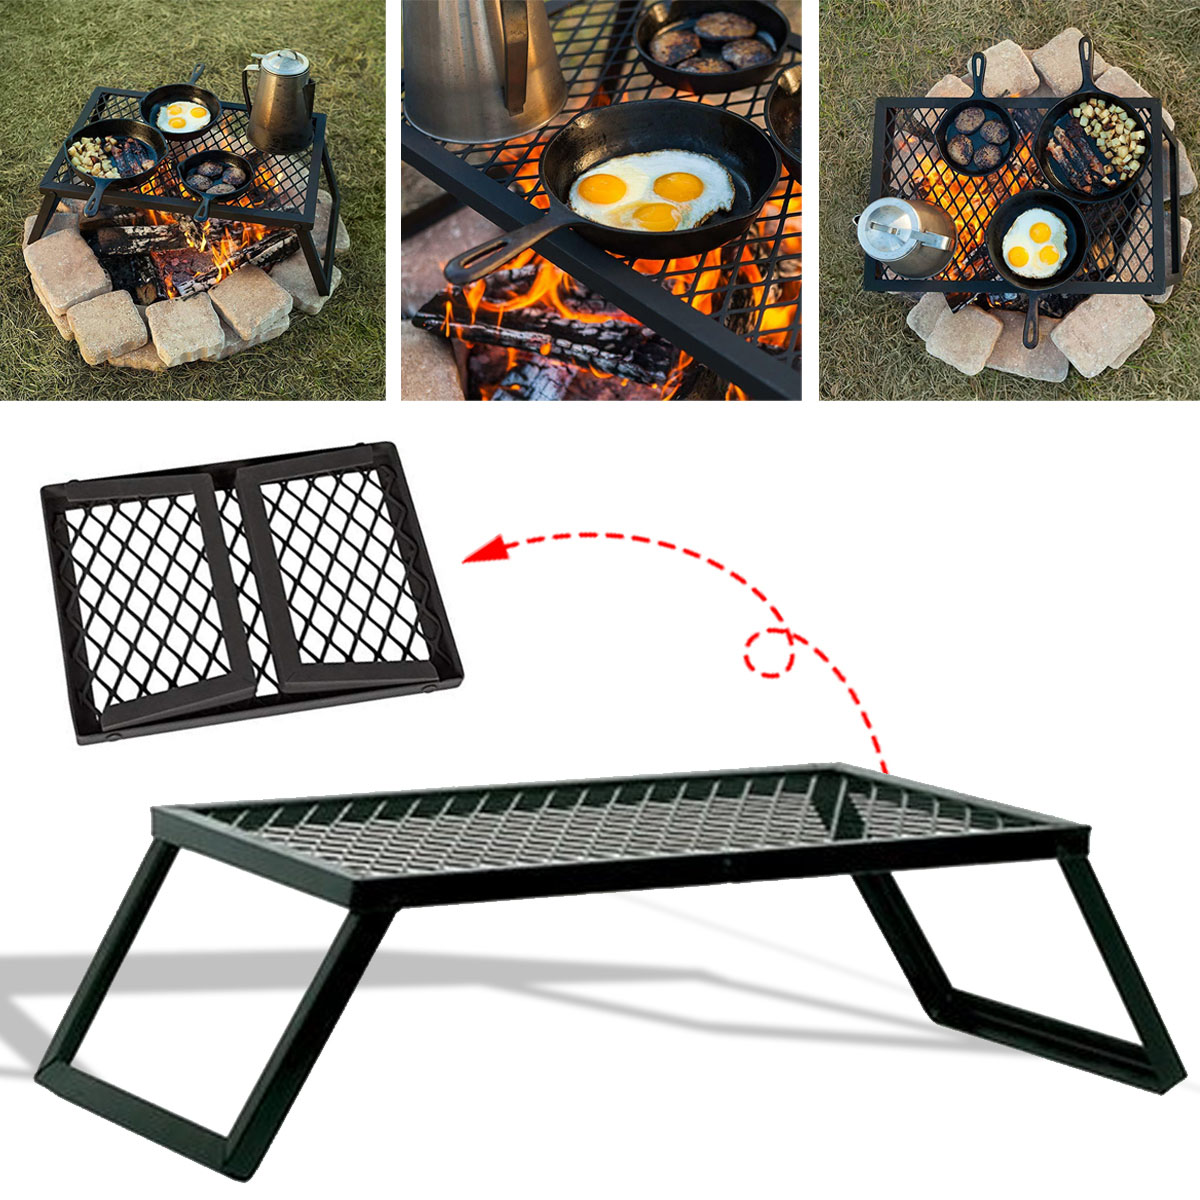 Portable Folding Campfire Grill Grate Camping BBQ Cooking Open Over Fire Outdoor Folding Garden Furniture